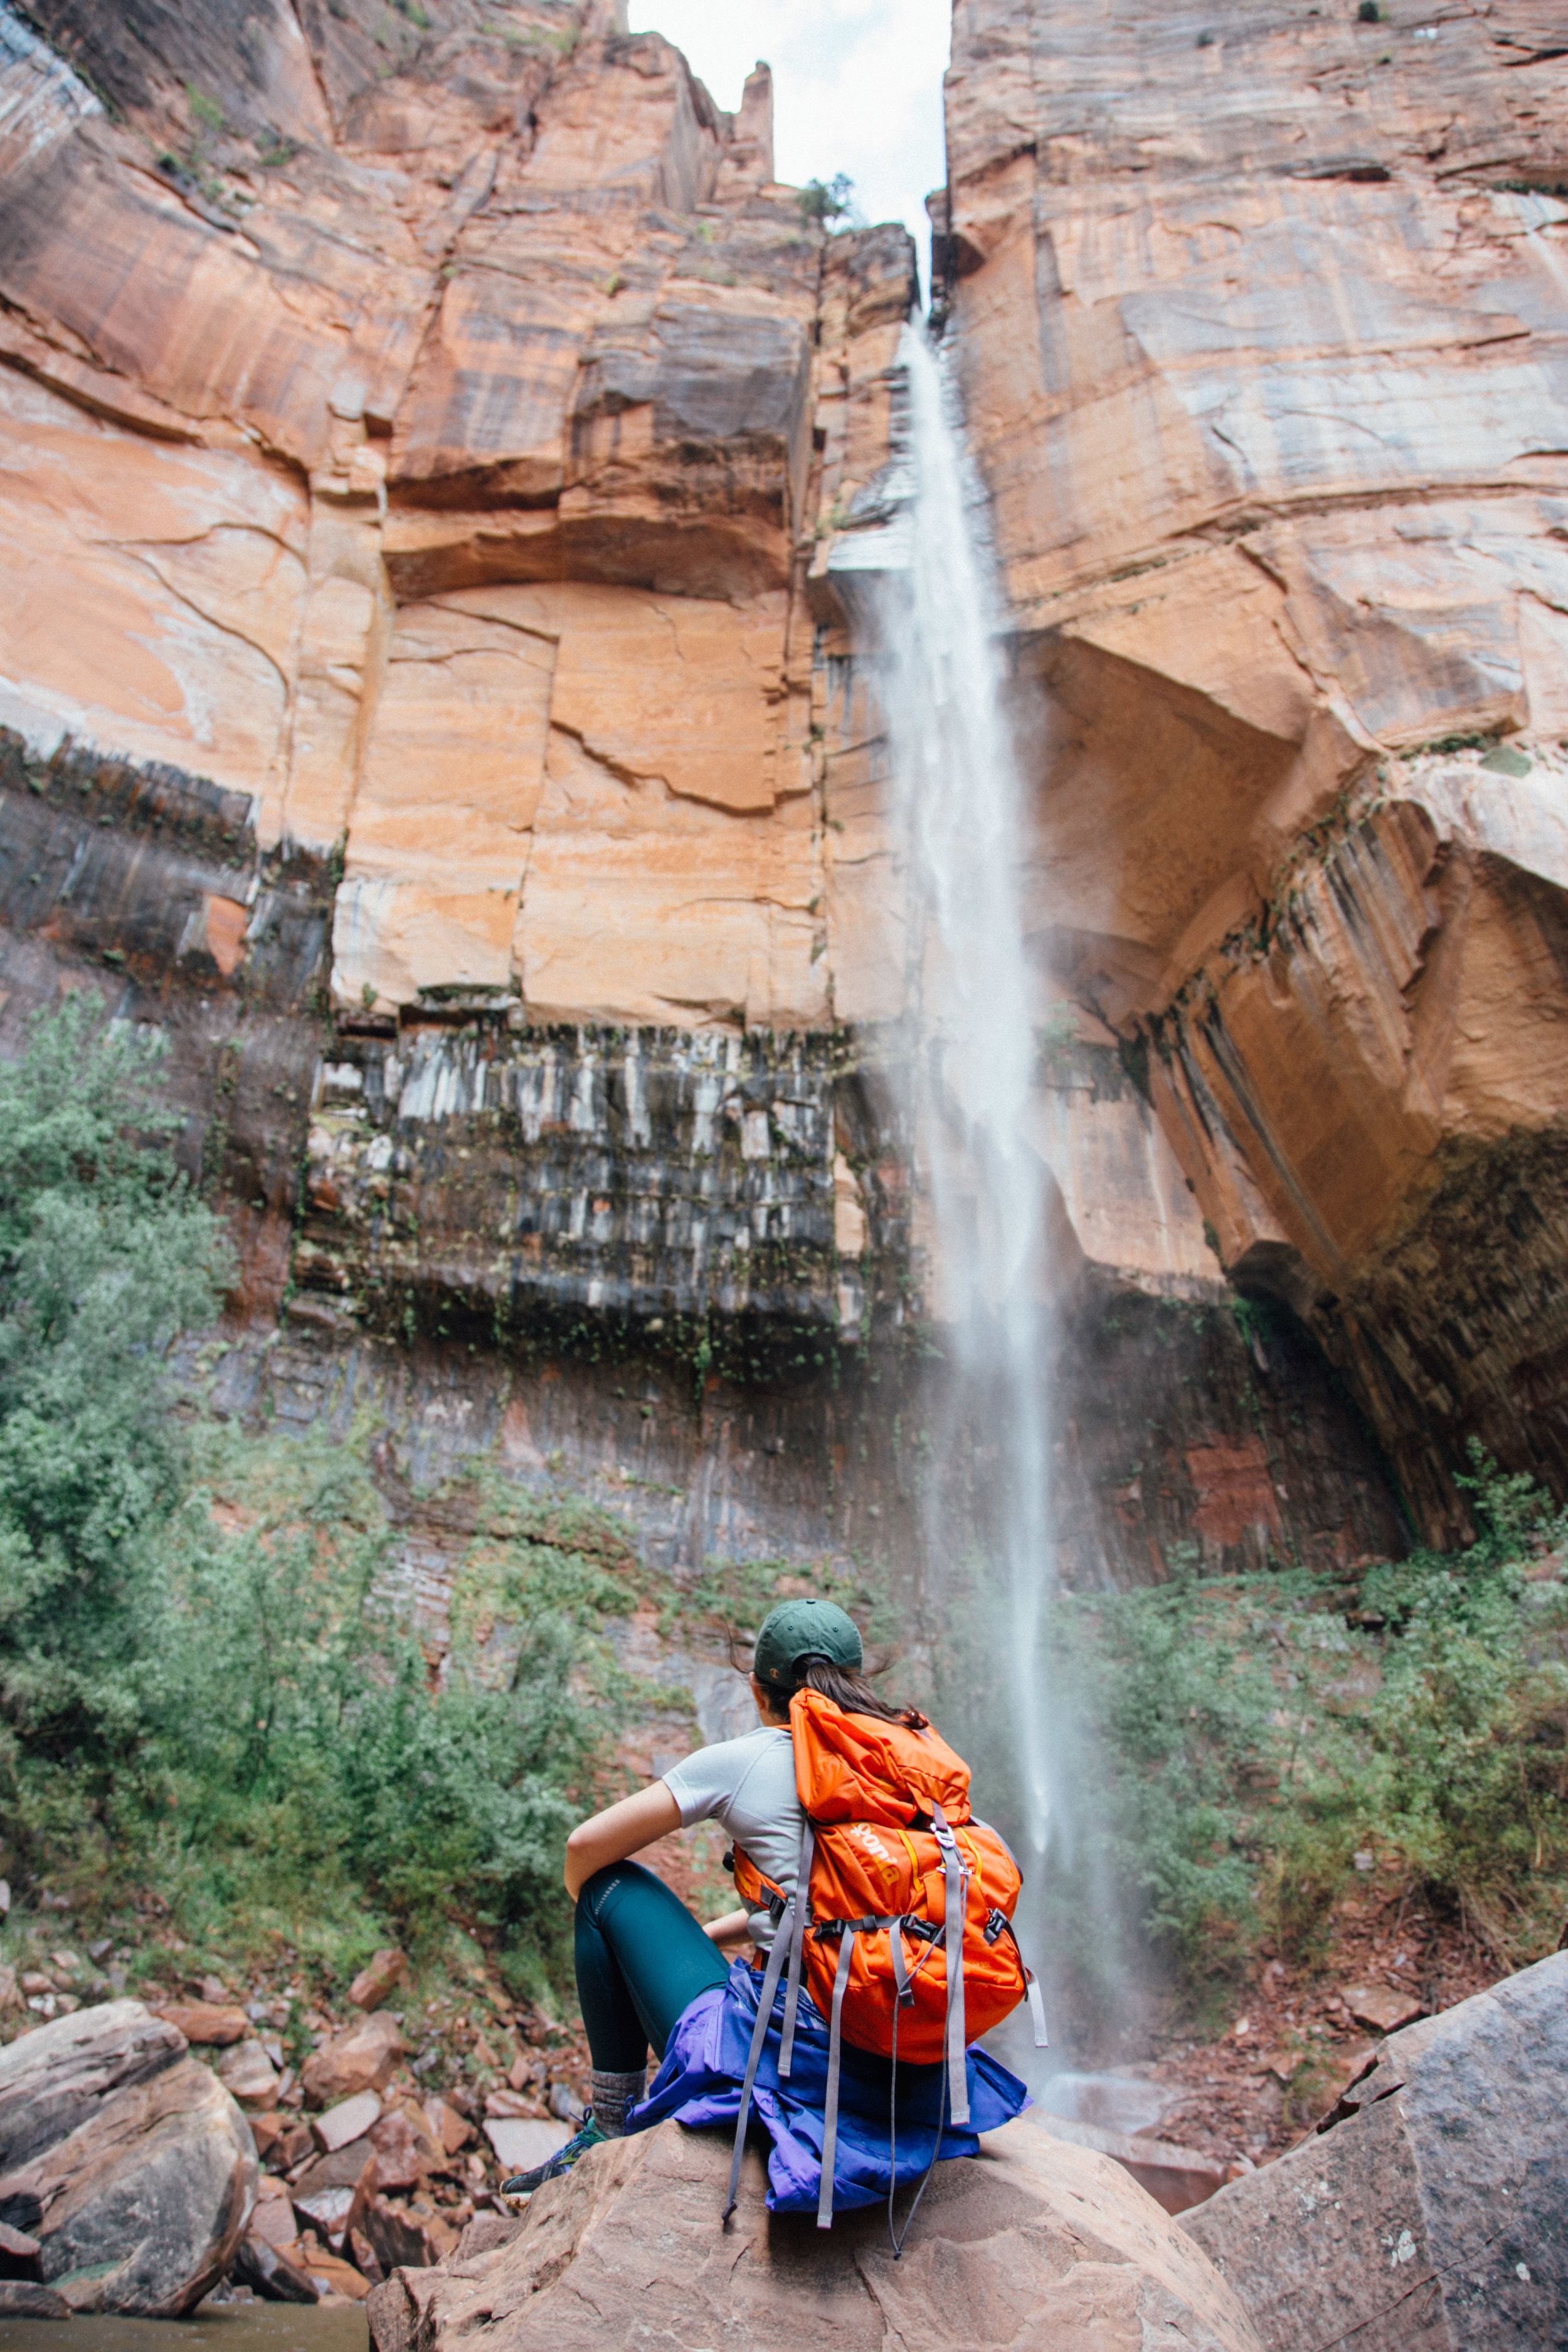 One of the best hikes of my life, the narrows absolutely blew me away. Day Trip In Zion National Park Utah Sarah Ching Photography